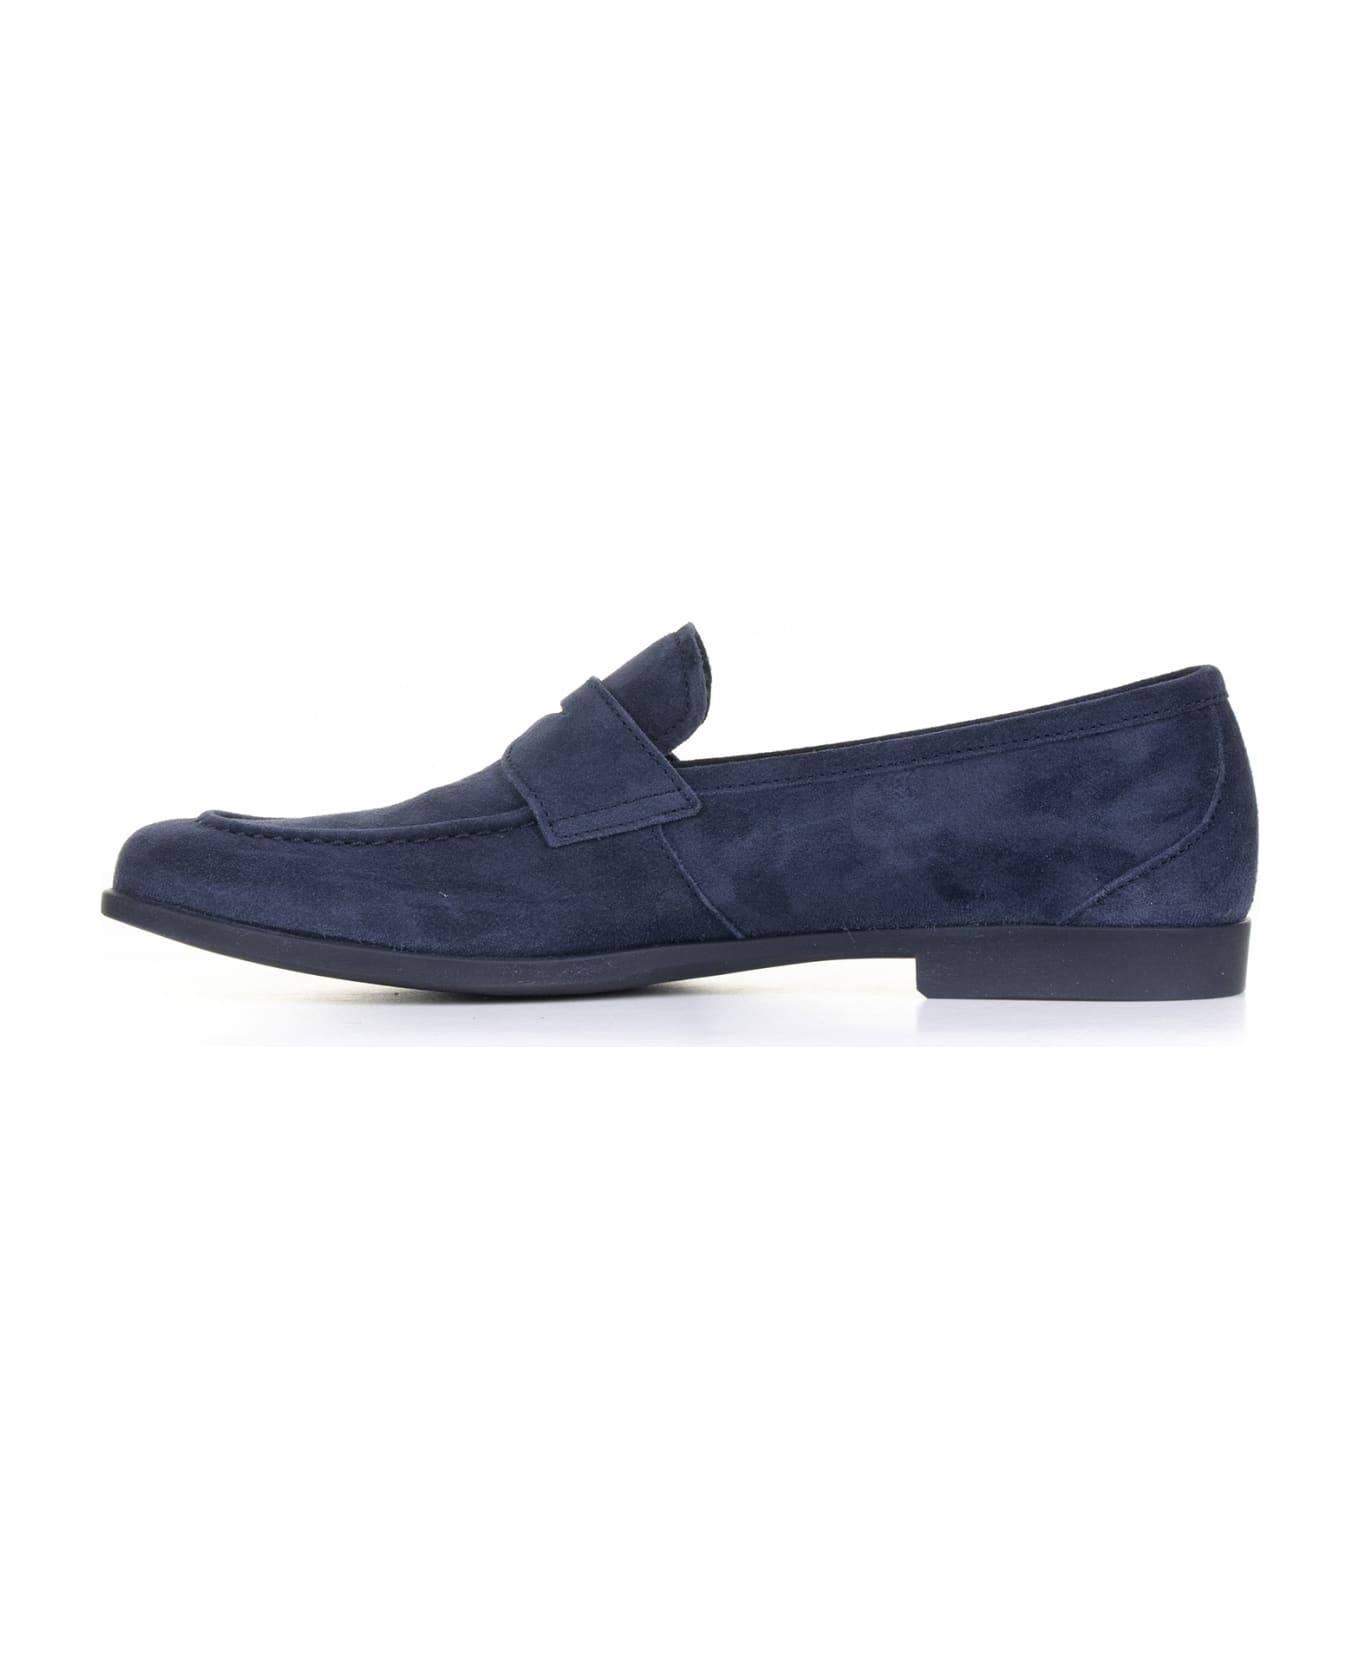 Fratelli Rossetti One Blue Suede Loafer - NAVY ローファー＆デッキシューズ